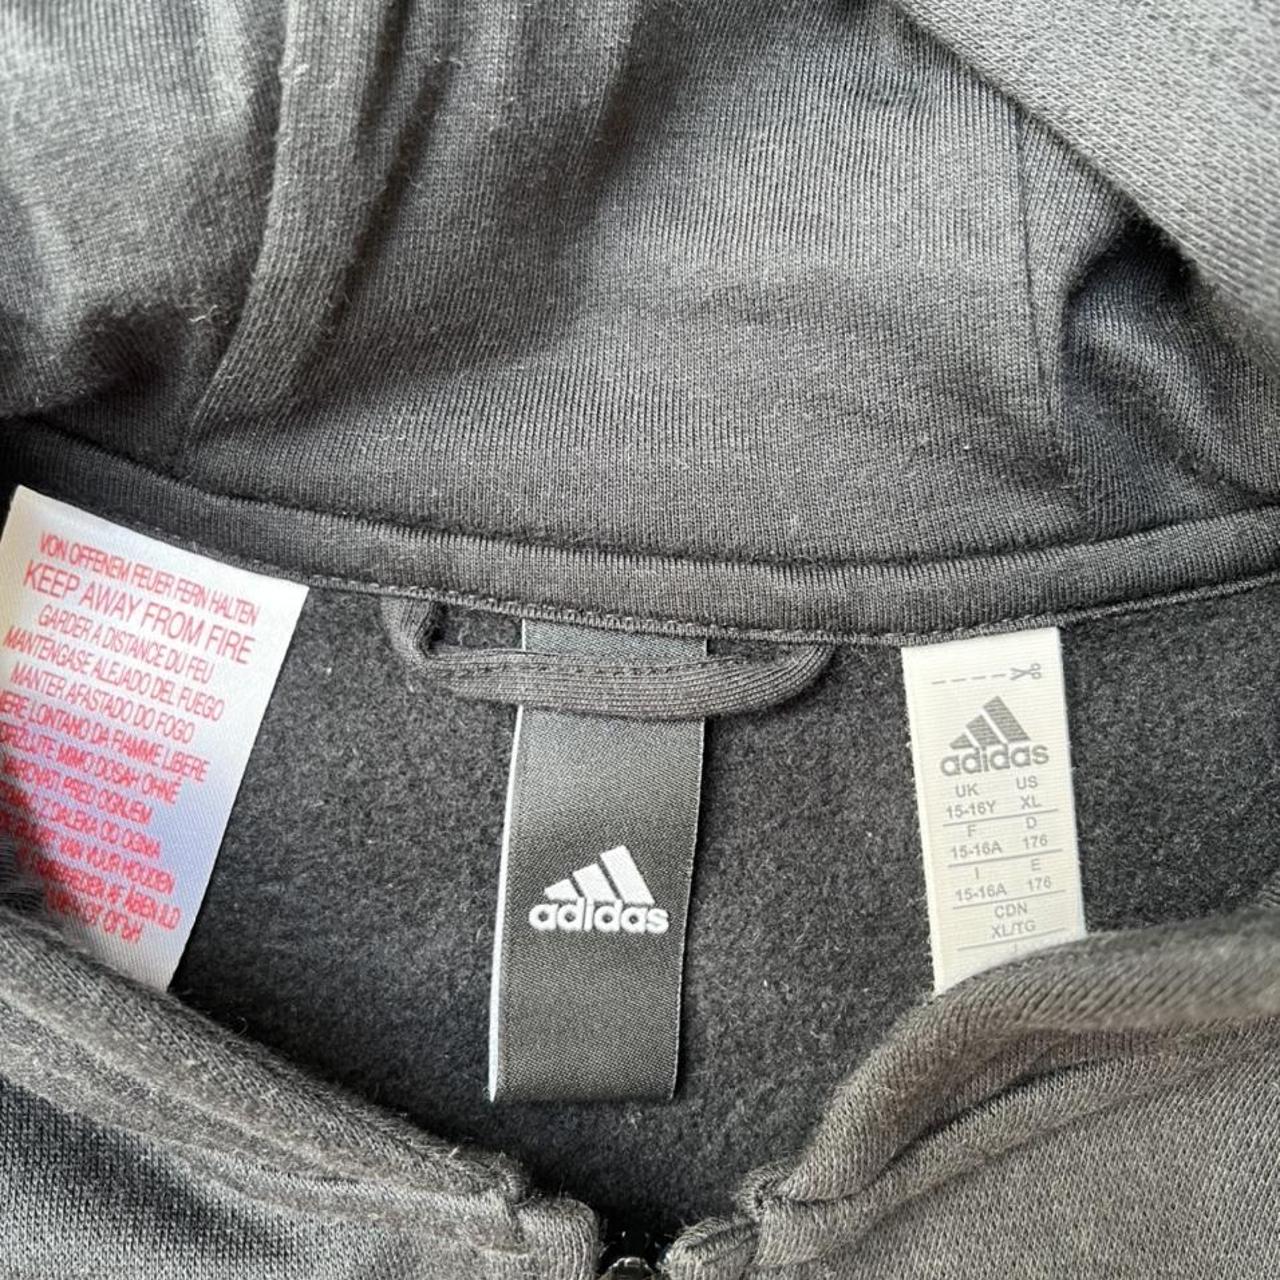 adidas body warmer hoodie says 16years but will fit... - Depop